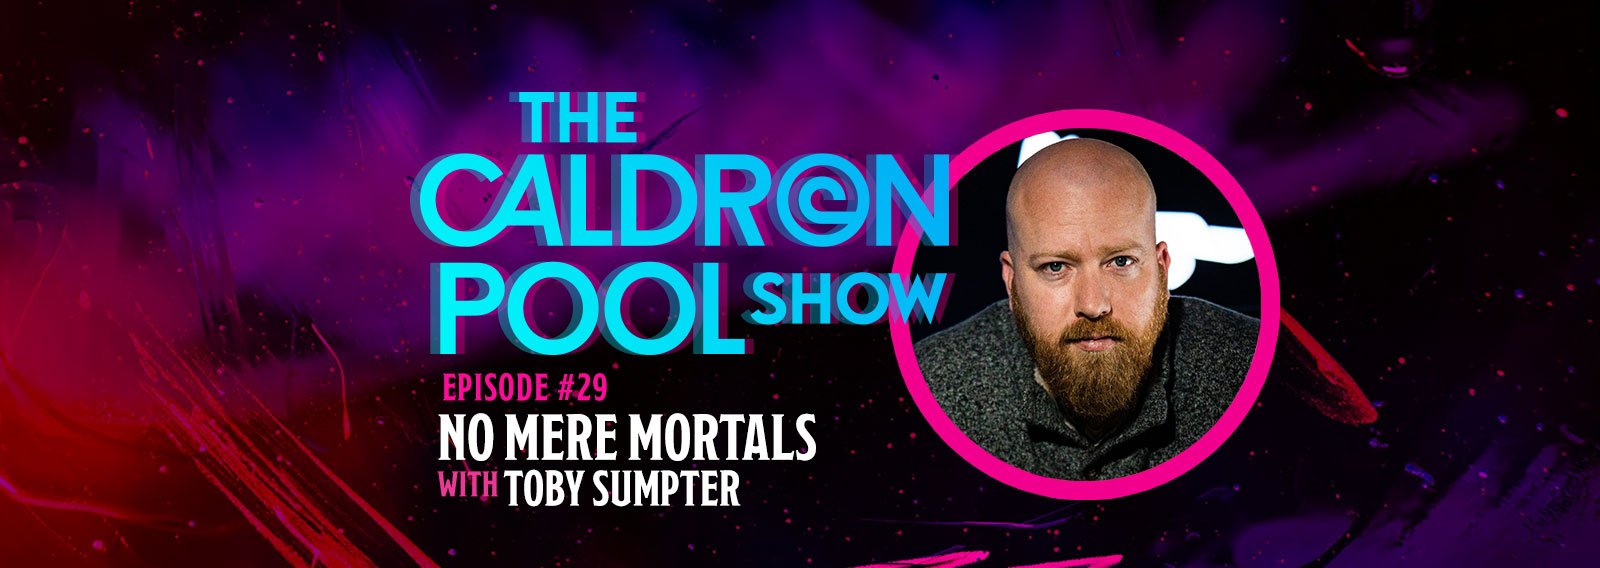 The Caldron Pool Show: #29 No Mere Mortals (with Toby Sumpter)